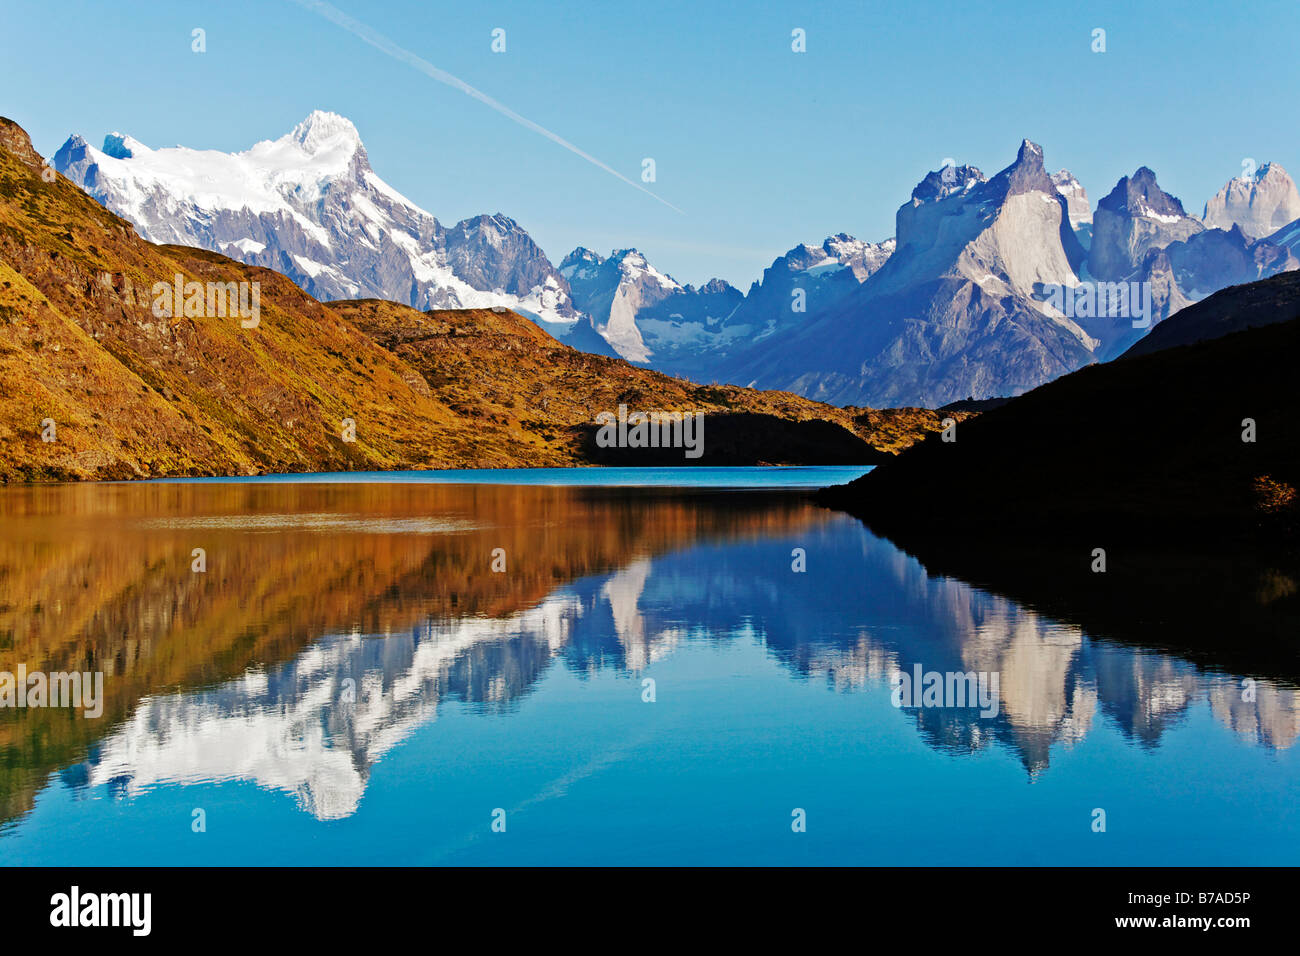 Reflection in mountain lake, Torres del Paine National Park, Patagonia, Chile, South America Stock Photo